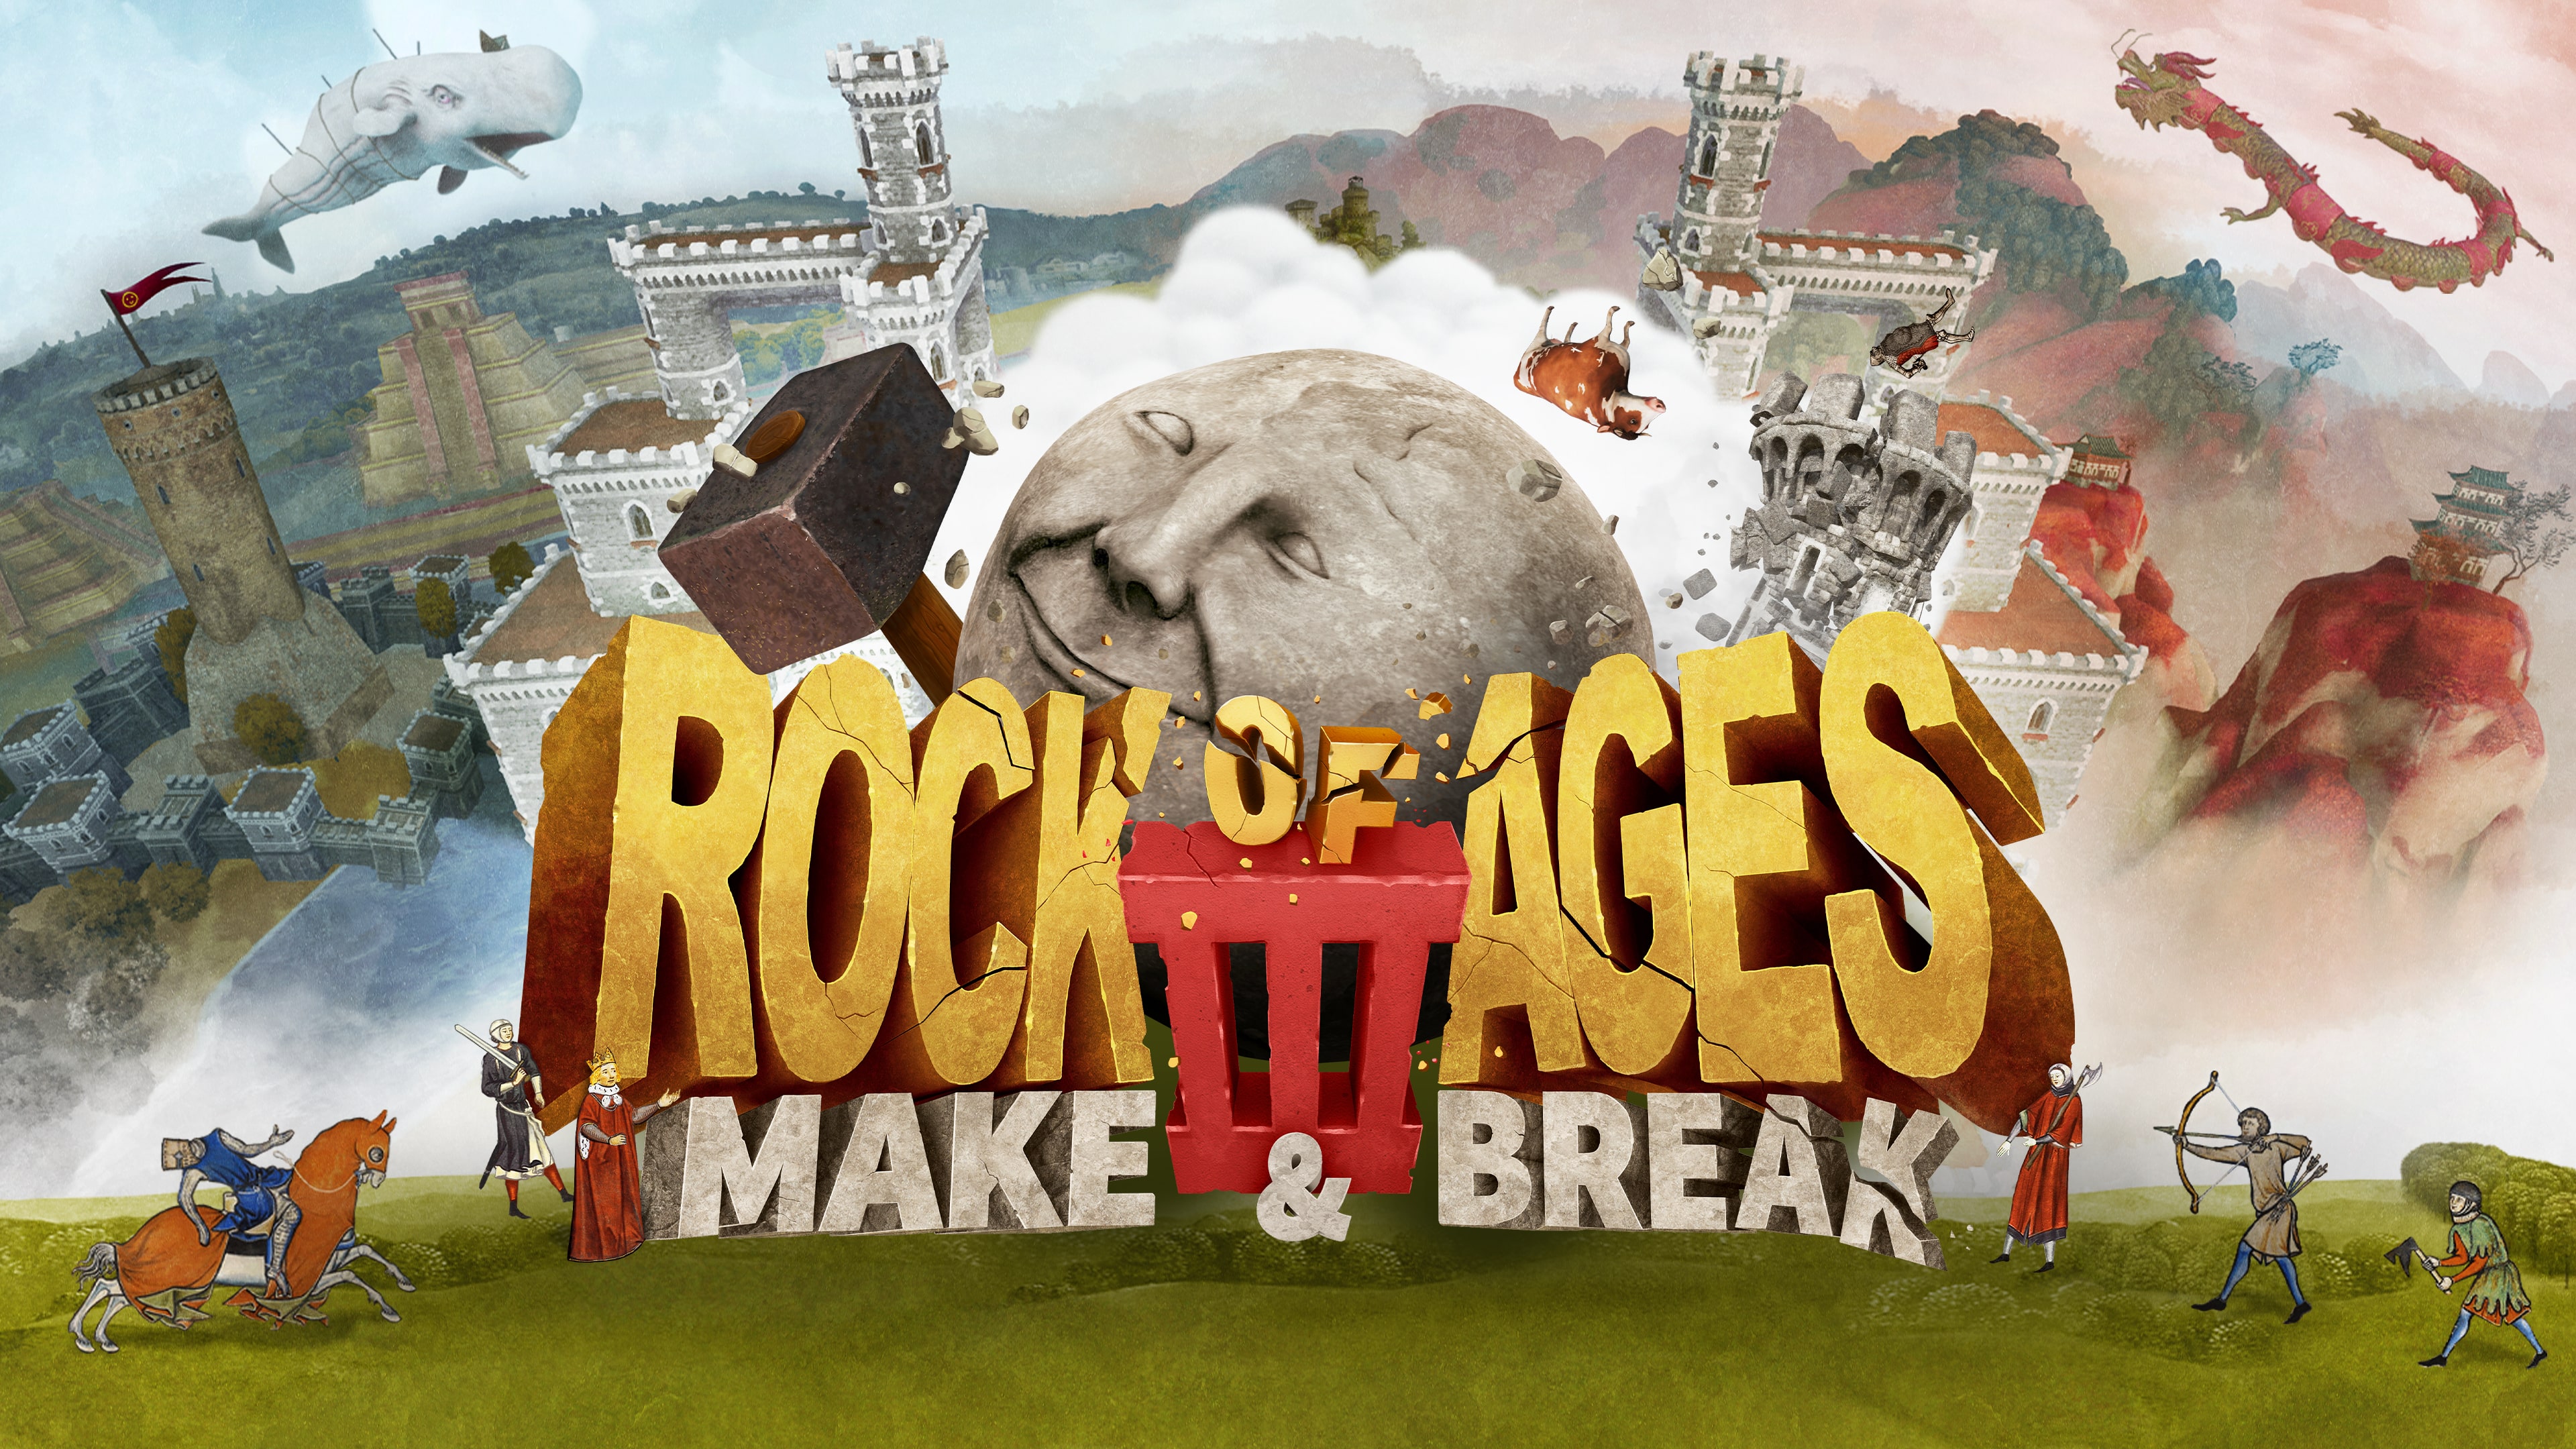 Rock of Ages 3: Make & Break (รองรับภาษาไทย) (Simplified Chinese, English, Korean, Traditional Chinese)